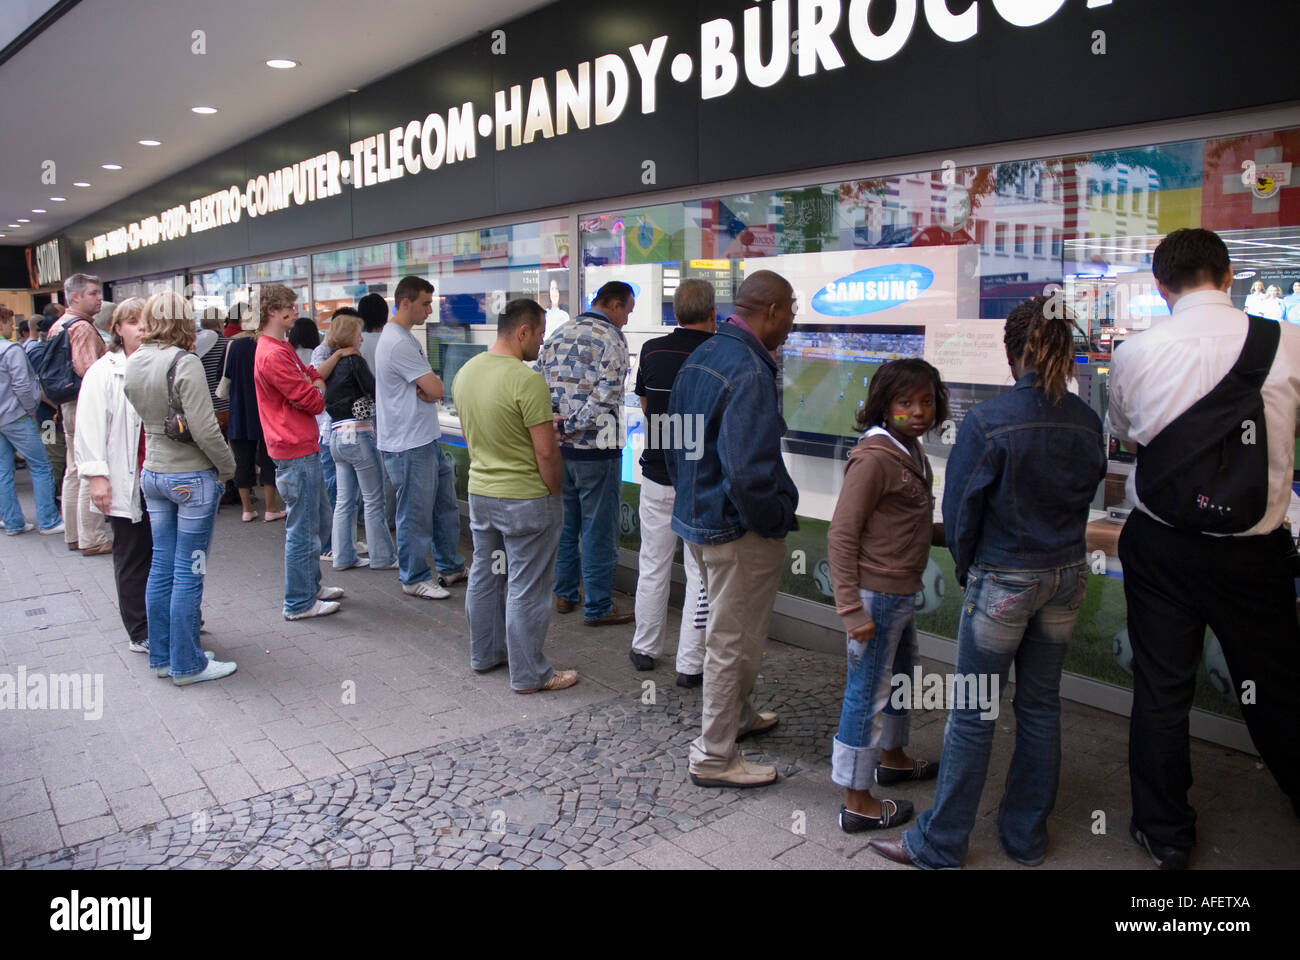 People in Dortmund watching the Brazil v Ghana second round World Cup match in a TV shop window Stock Photo